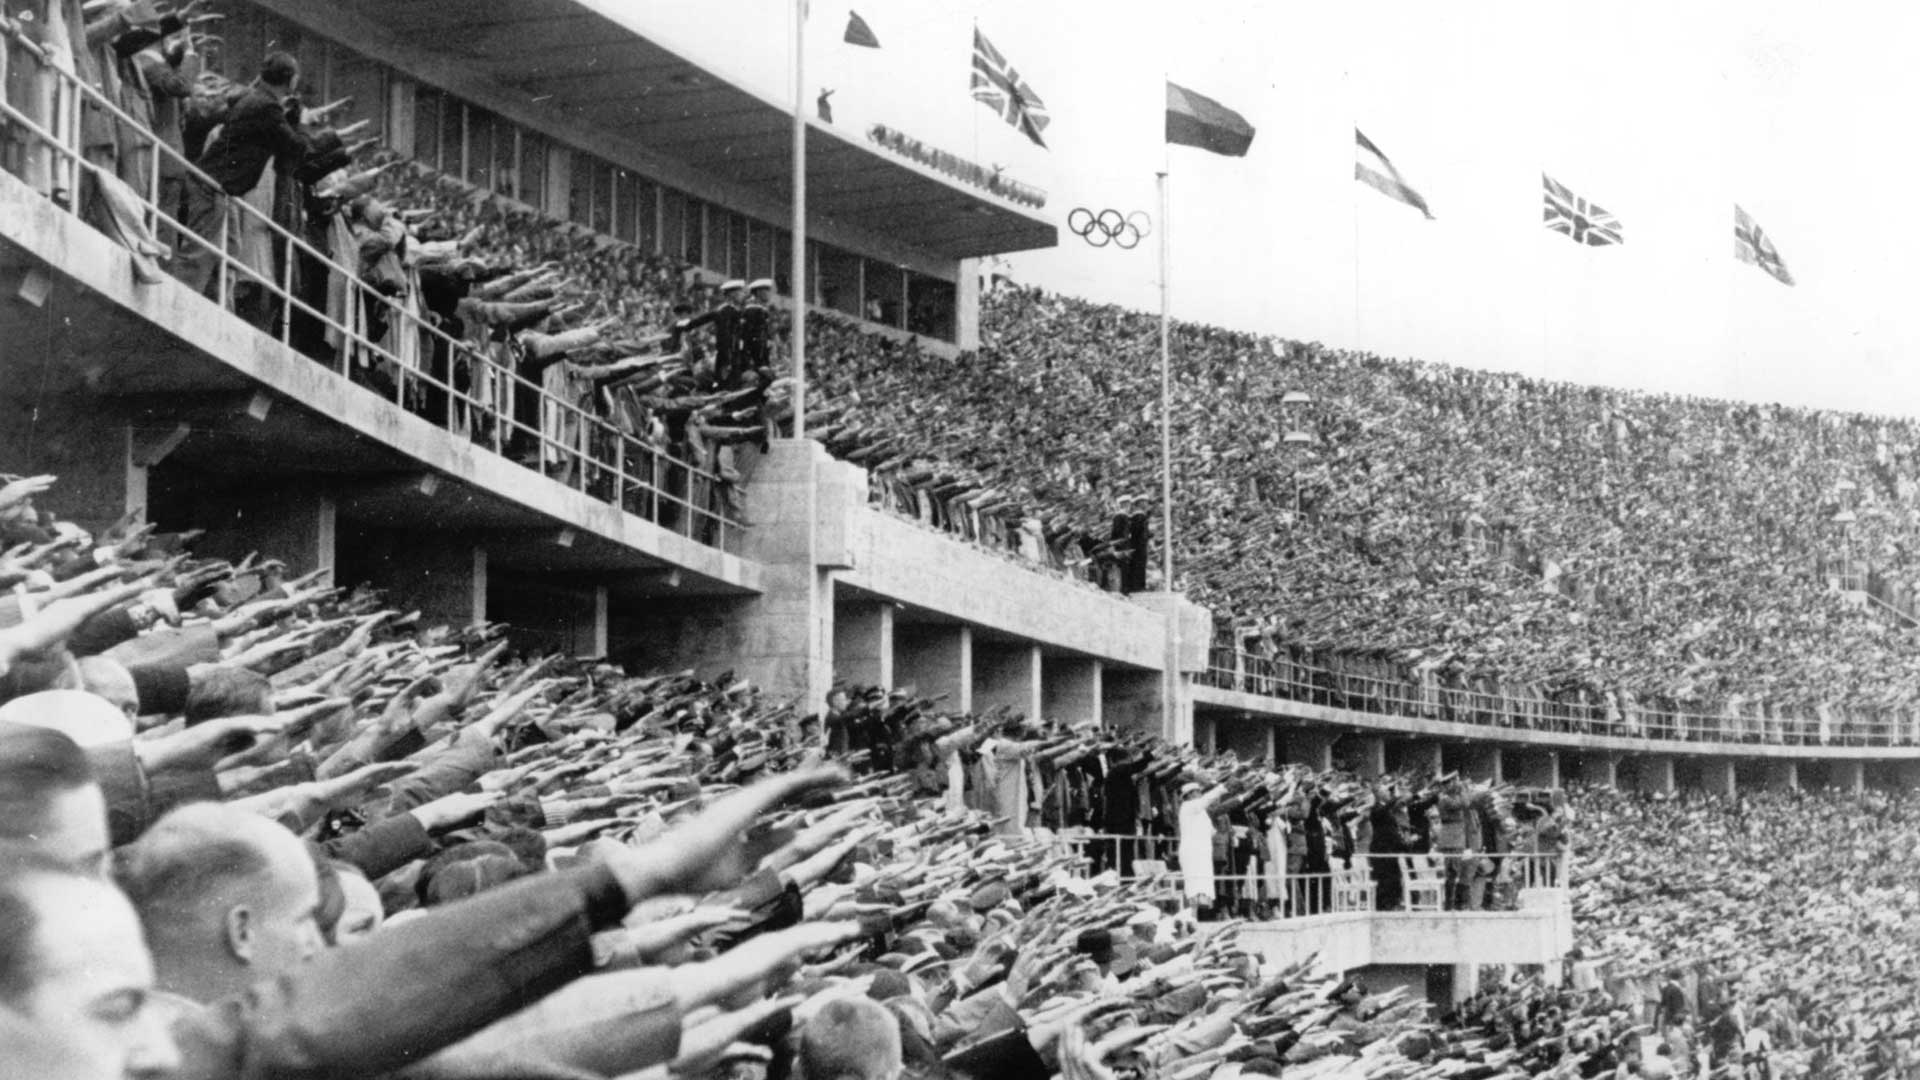 How the 1936 Berlin Olympics Became a Nazi Showcase